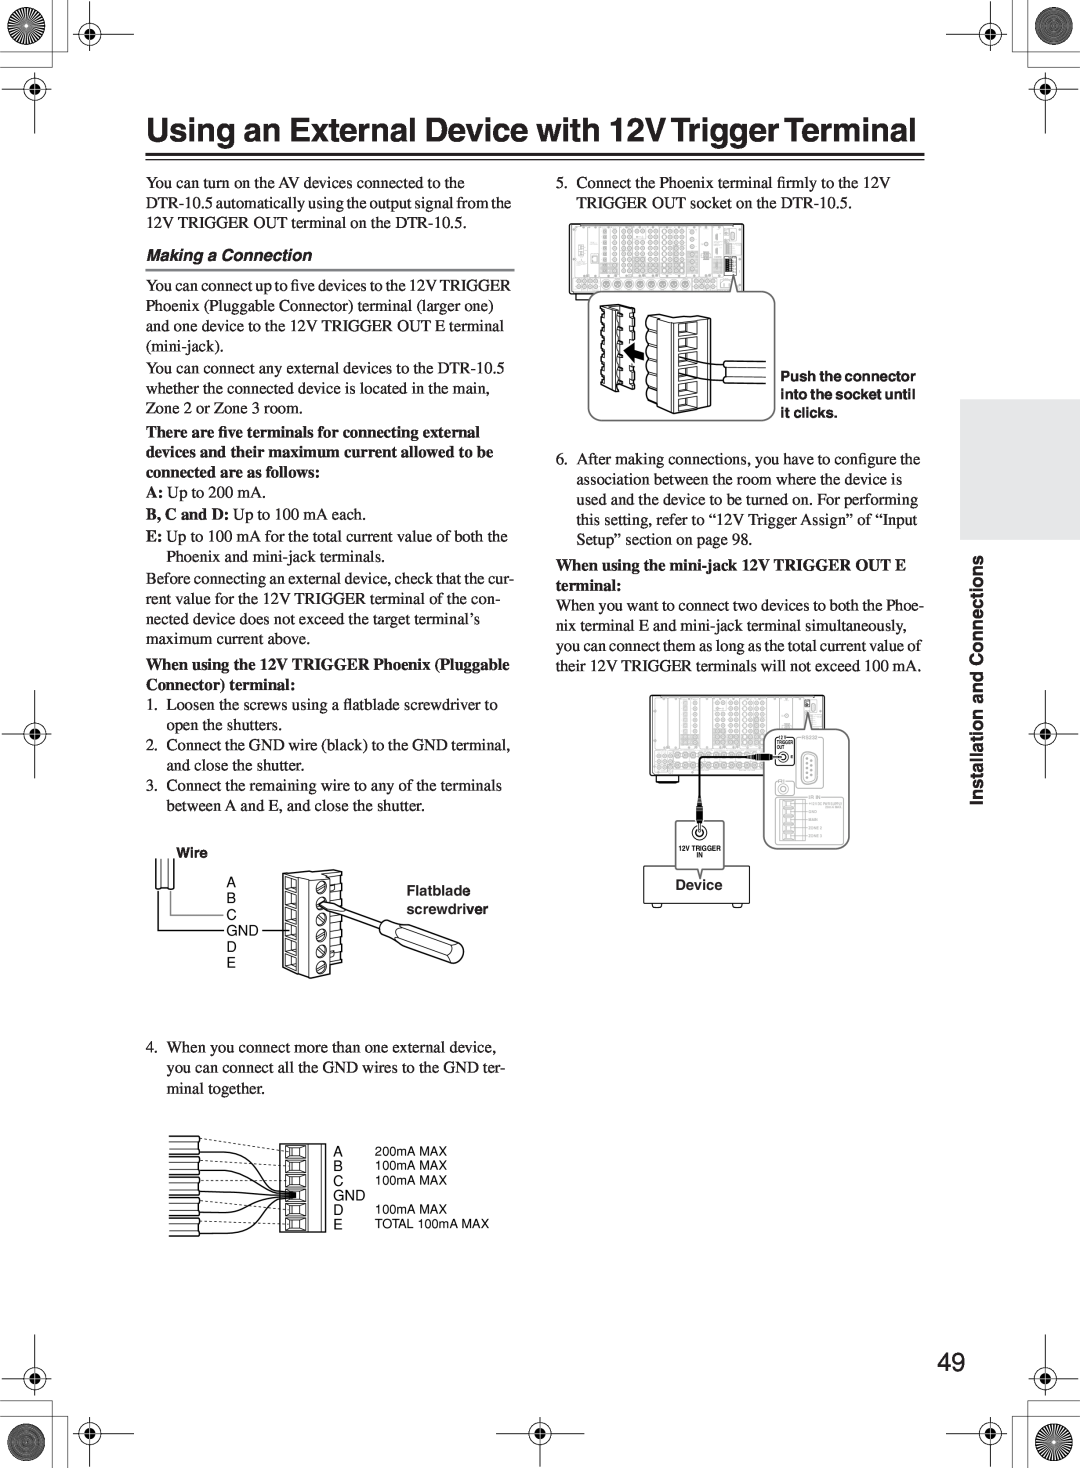 Integra DTR-10.5 instruction manual Making a Connection, Installation and Connections 